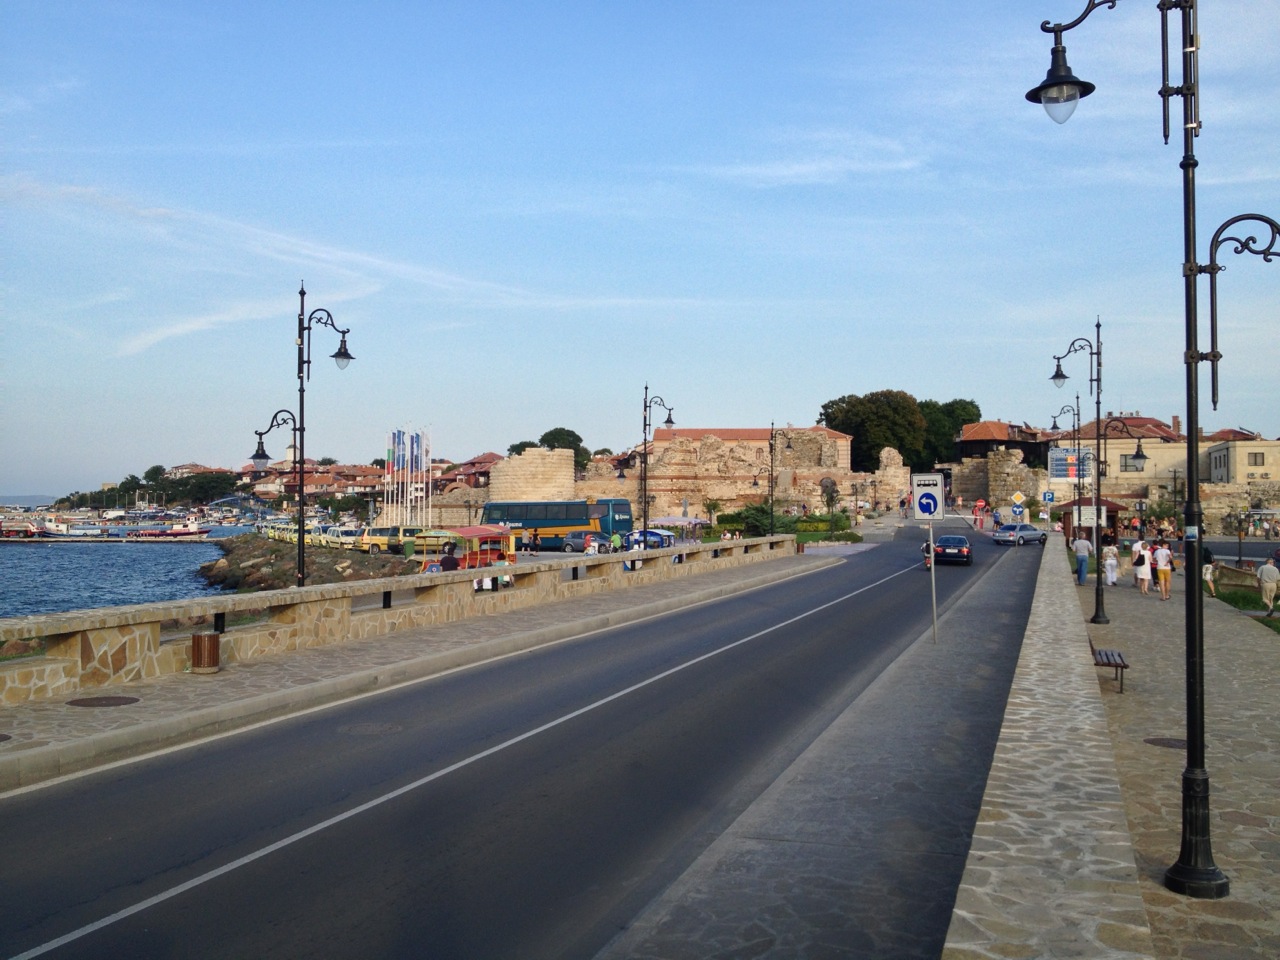 Entering the old town. There is a large parking on the left and smaller one on the right